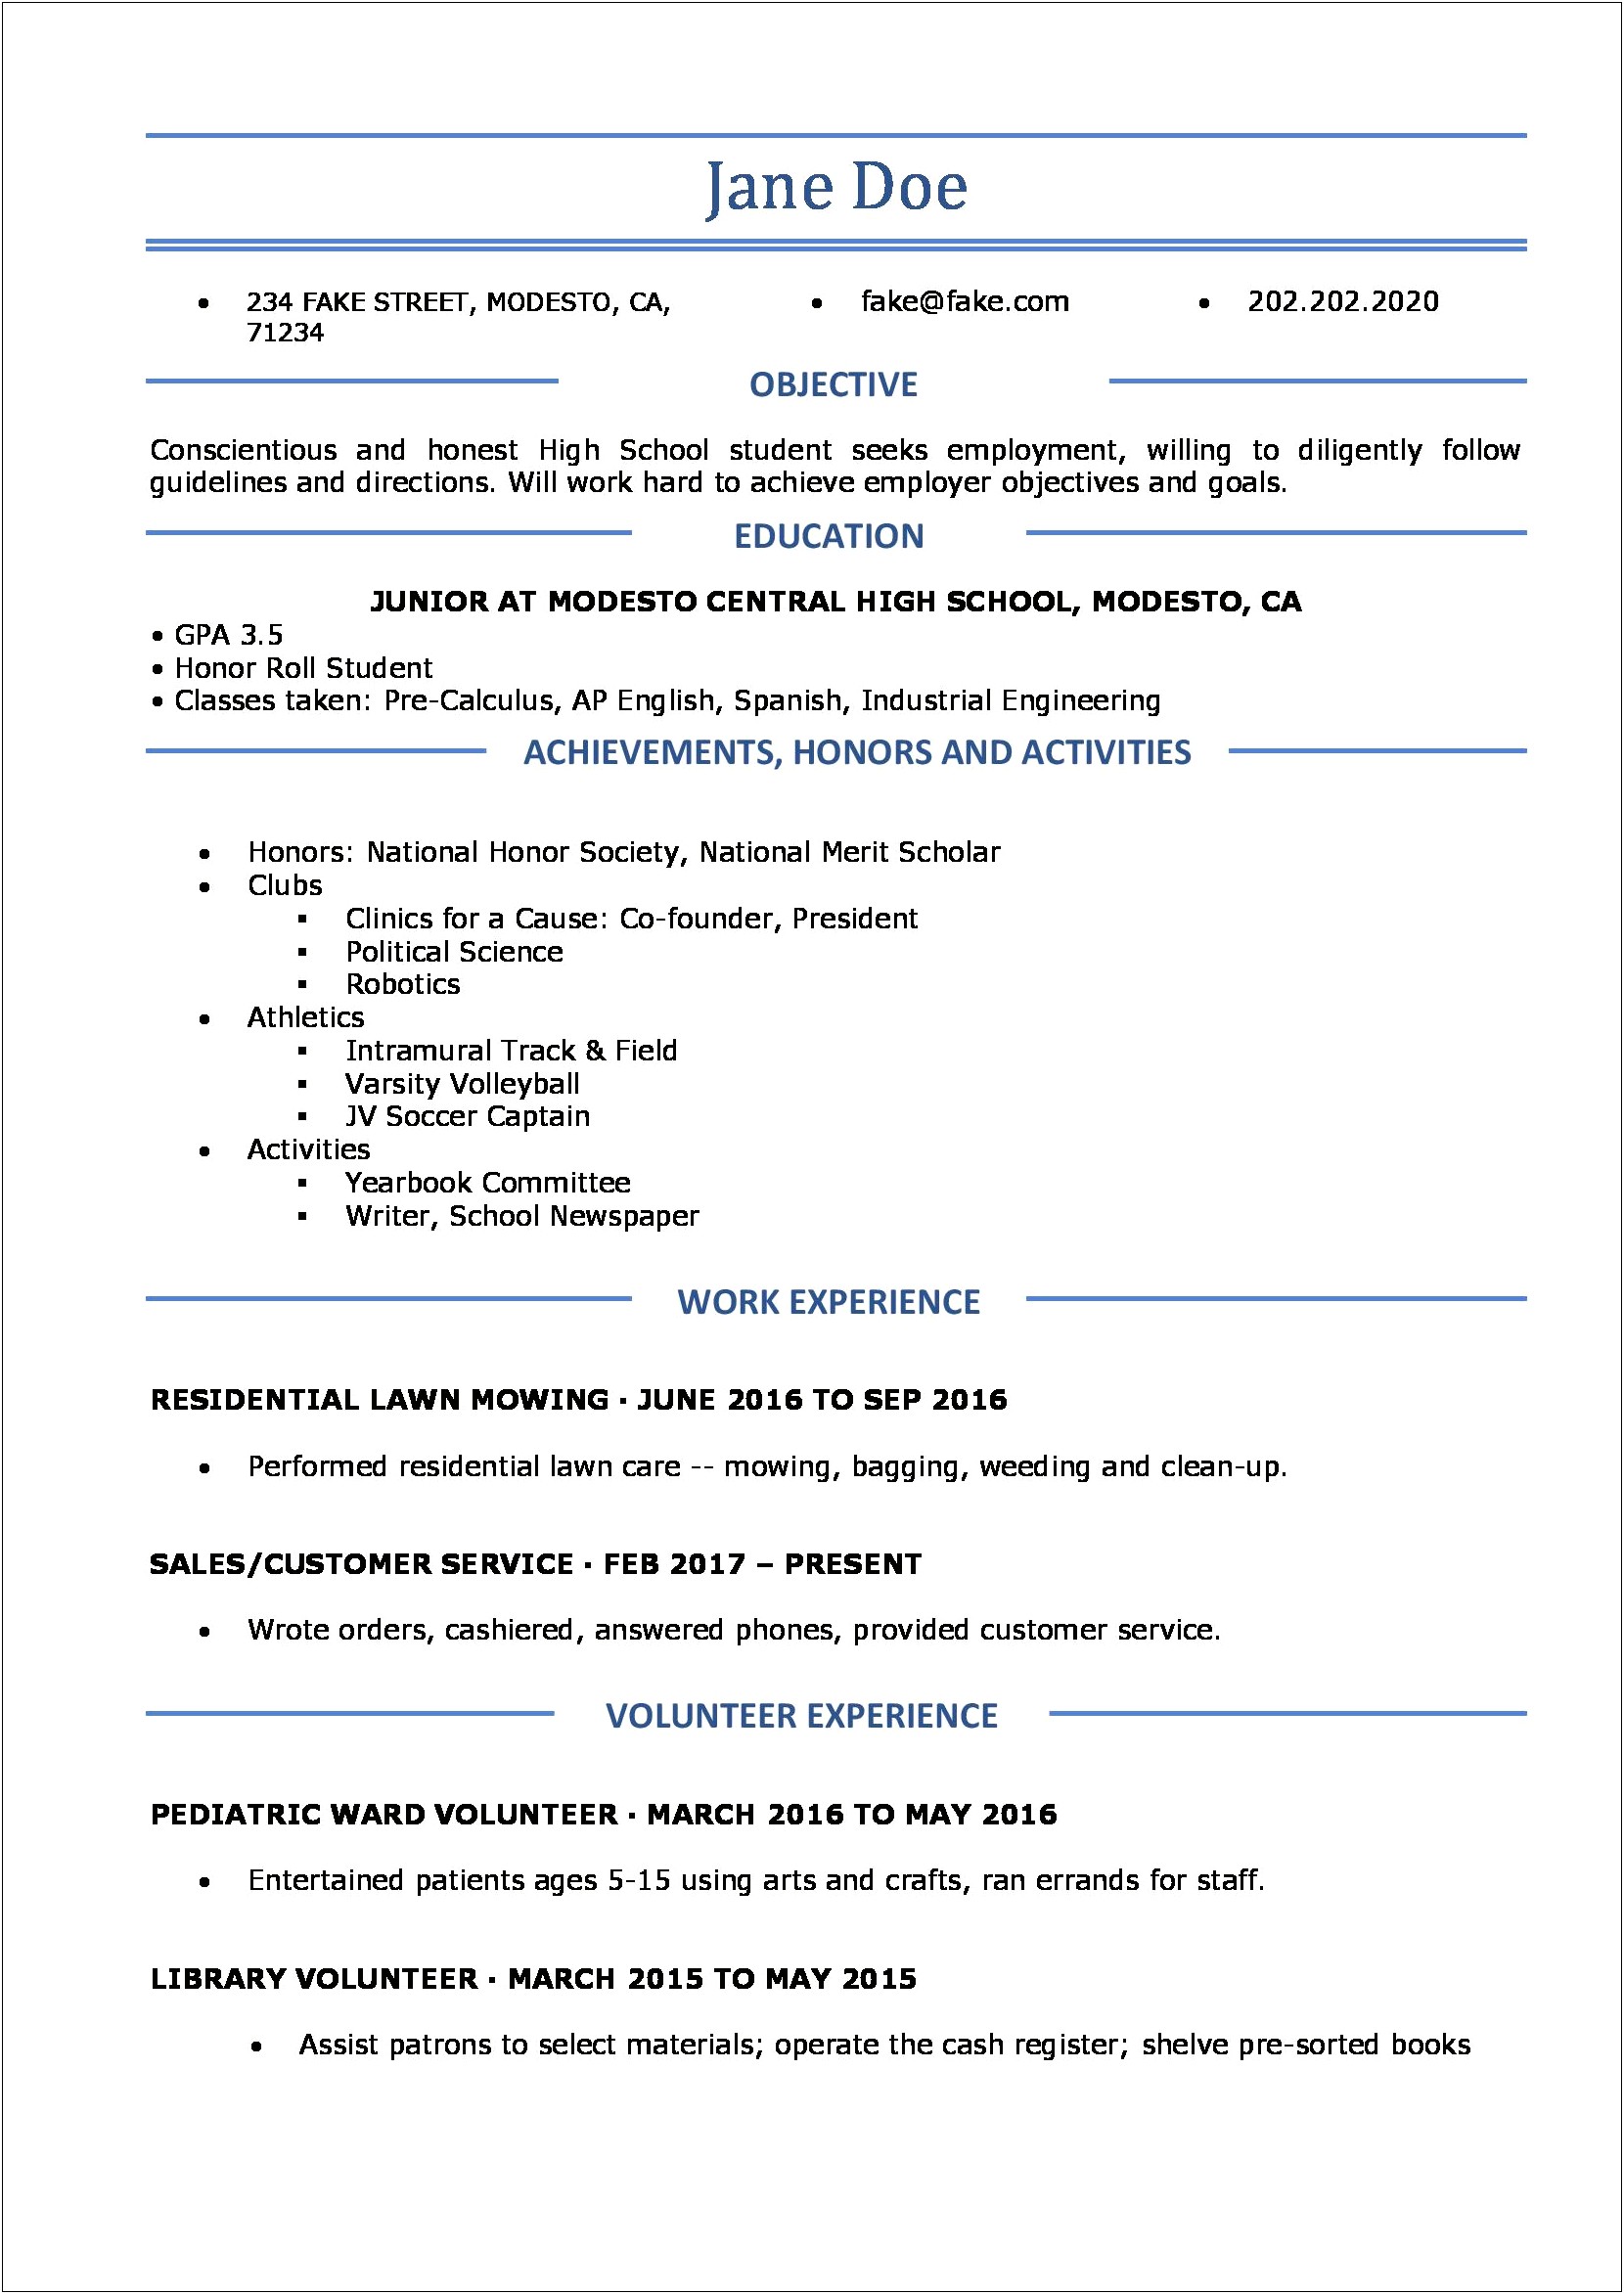 Sample College Application Resume With Athletic Honors